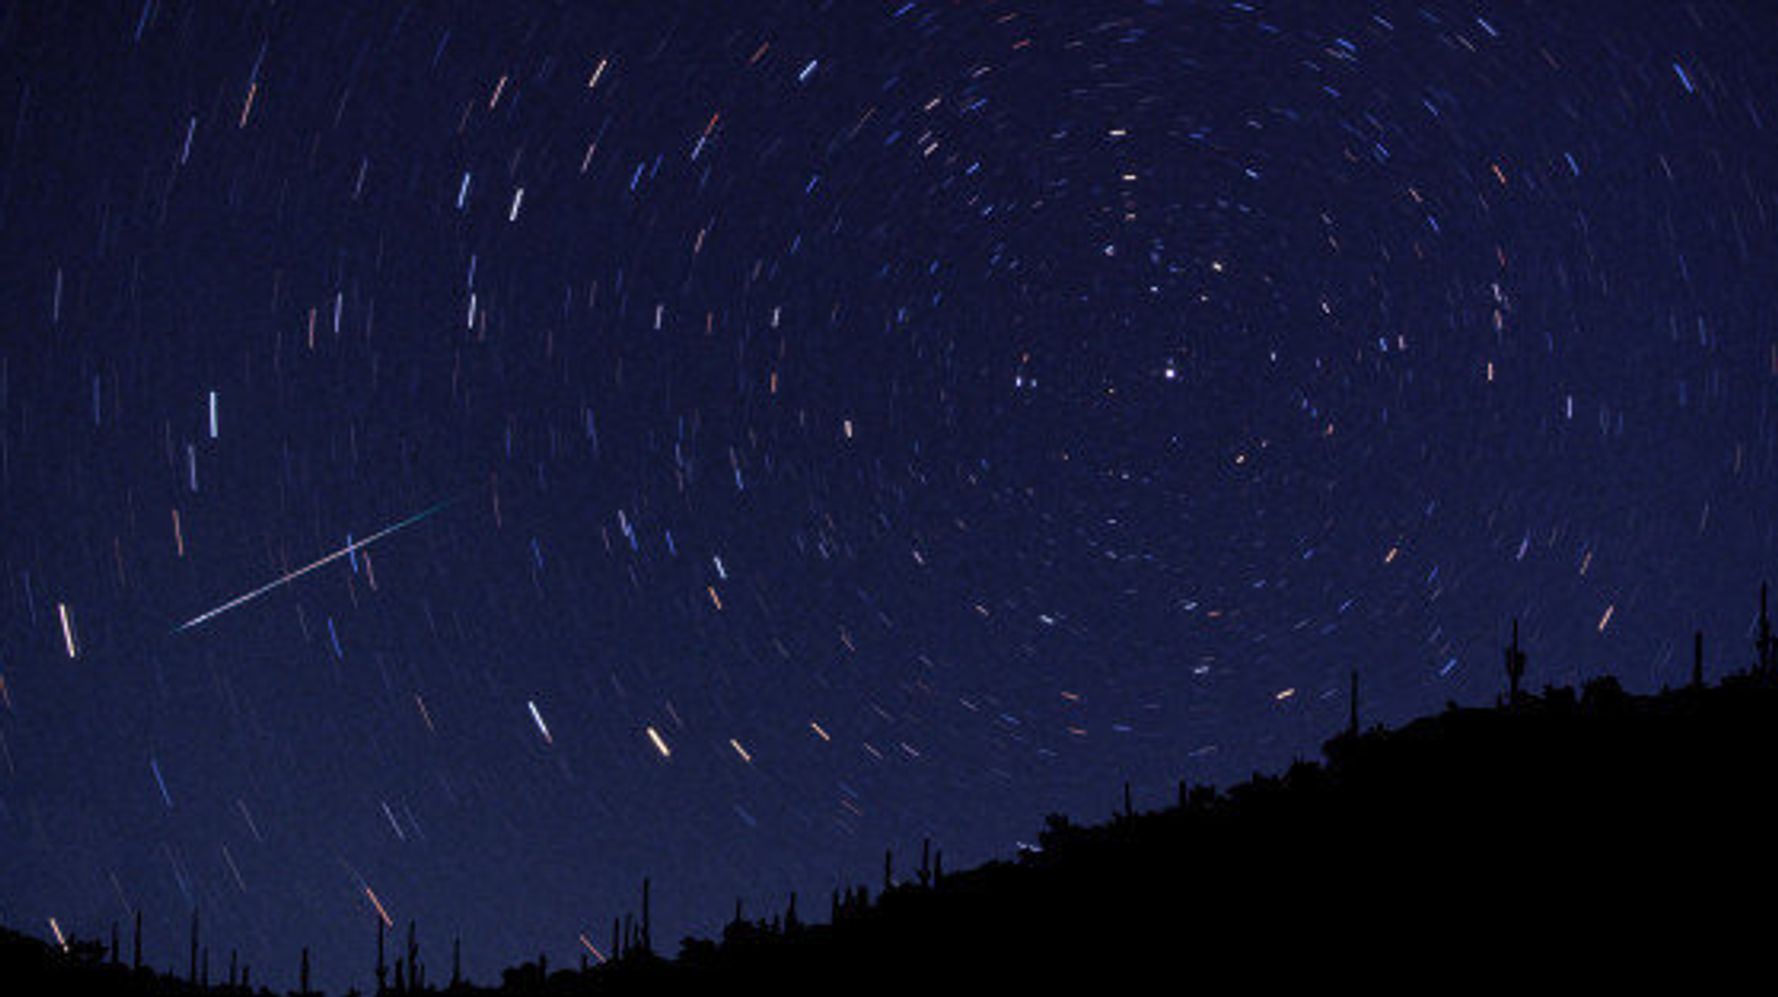 Perseid Meteor Shower Where And How To Watch The Astronomical Event